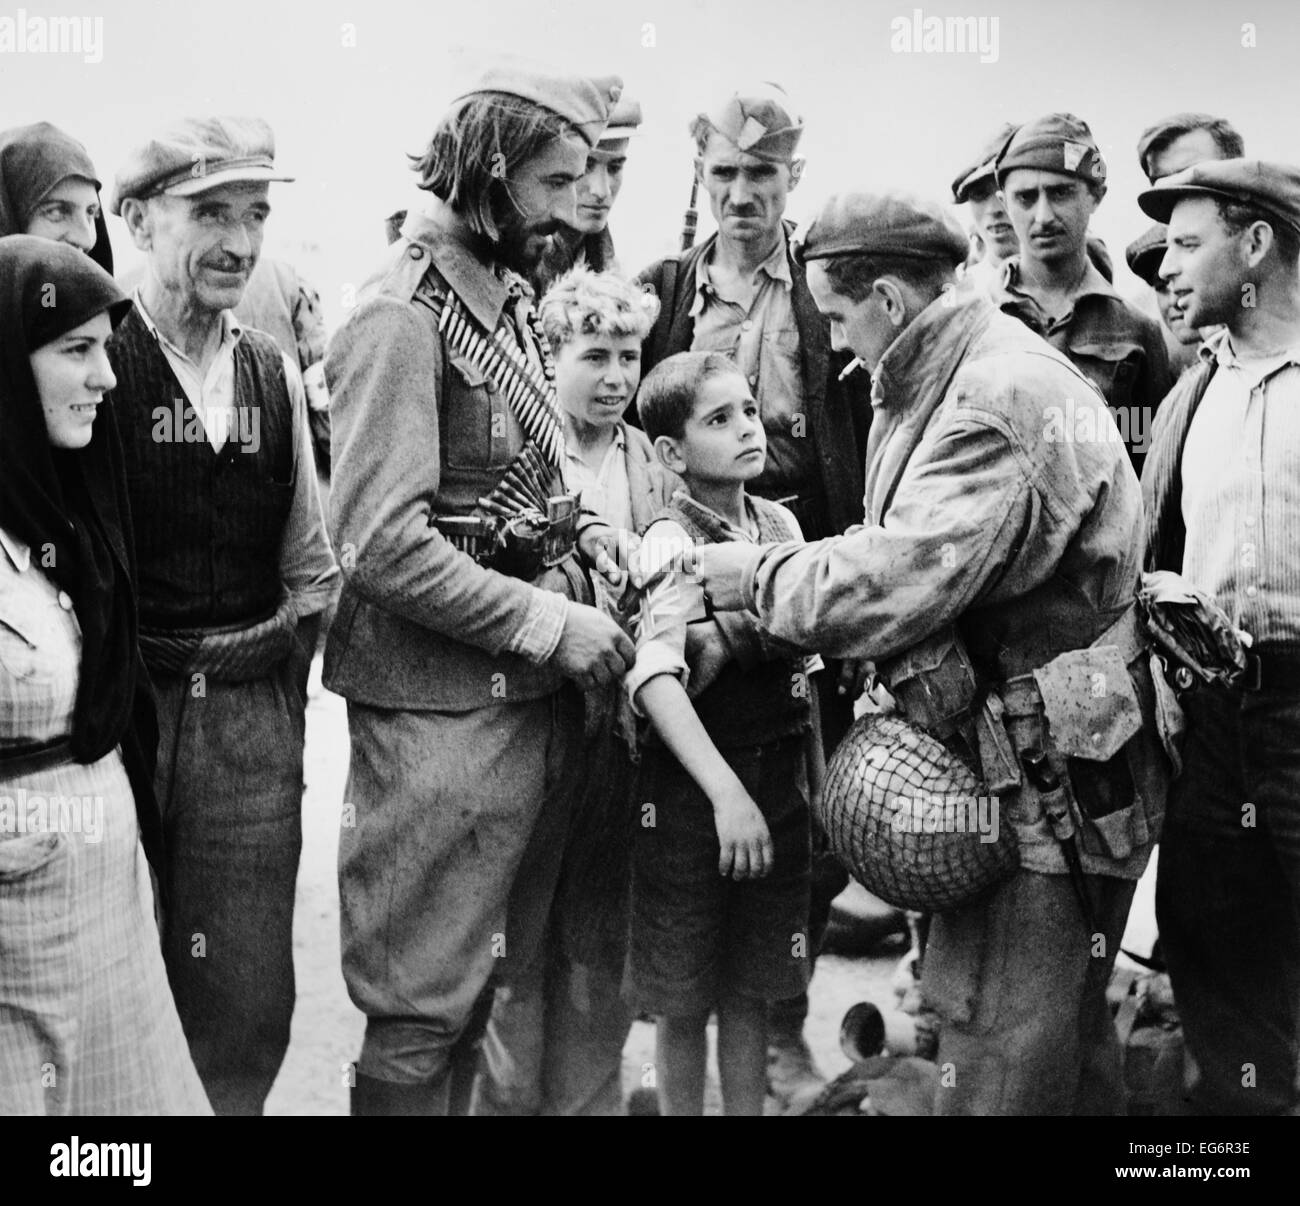 British liberator of Greece, pinning a British band on the arm of a young boy. Oct. 24, 1944. The British parachutists jumped Stock Photo